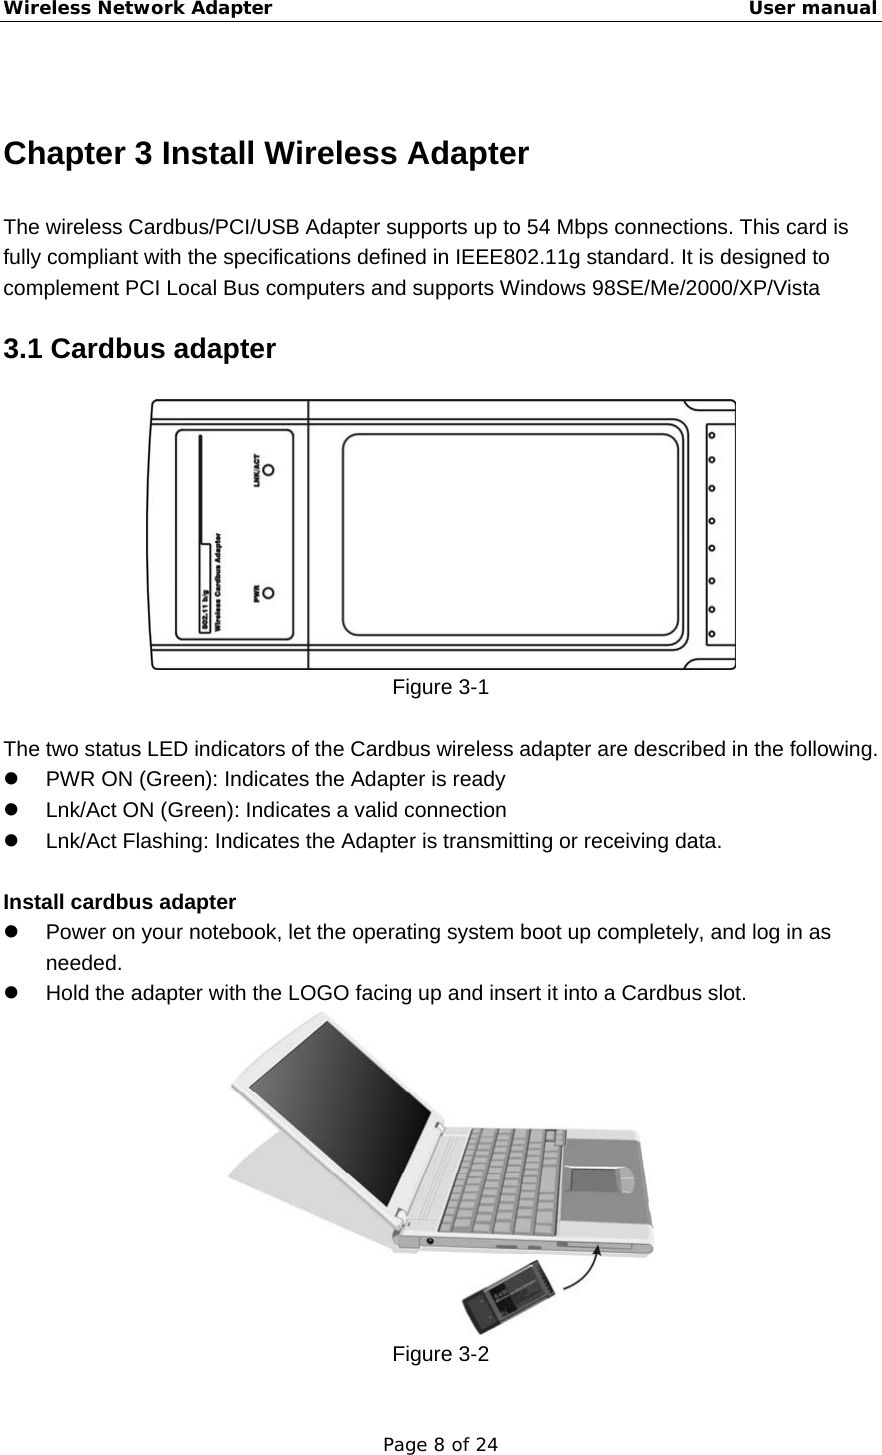 Wireless Network Adapter                                                    User manual Page 8 of 24  Chapter 3 Install Wireless Adapter The wireless Cardbus/PCI/USB Adapter supports up to 54 Mbps connections. This card is fully compliant with the specifications defined in IEEE802.11g standard. It is designed to complement PCI Local Bus computers and supports Windows 98SE/Me/2000/XP/Vista 3.1 Cardbus adapter  Figure 3-1  The two status LED indicators of the Cardbus wireless adapter are described in the following. z  PWR ON (Green): Indicates the Adapter is ready z  Lnk/Act ON (Green): Indicates a valid connection   z  Lnk/Act Flashing: Indicates the Adapter is transmitting or receiving data.  Install cardbus adapter z  Power on your notebook, let the operating system boot up completely, and log in as needed. z  Hold the adapter with the LOGO facing up and insert it into a Cardbus slot.    Figure 3-2 